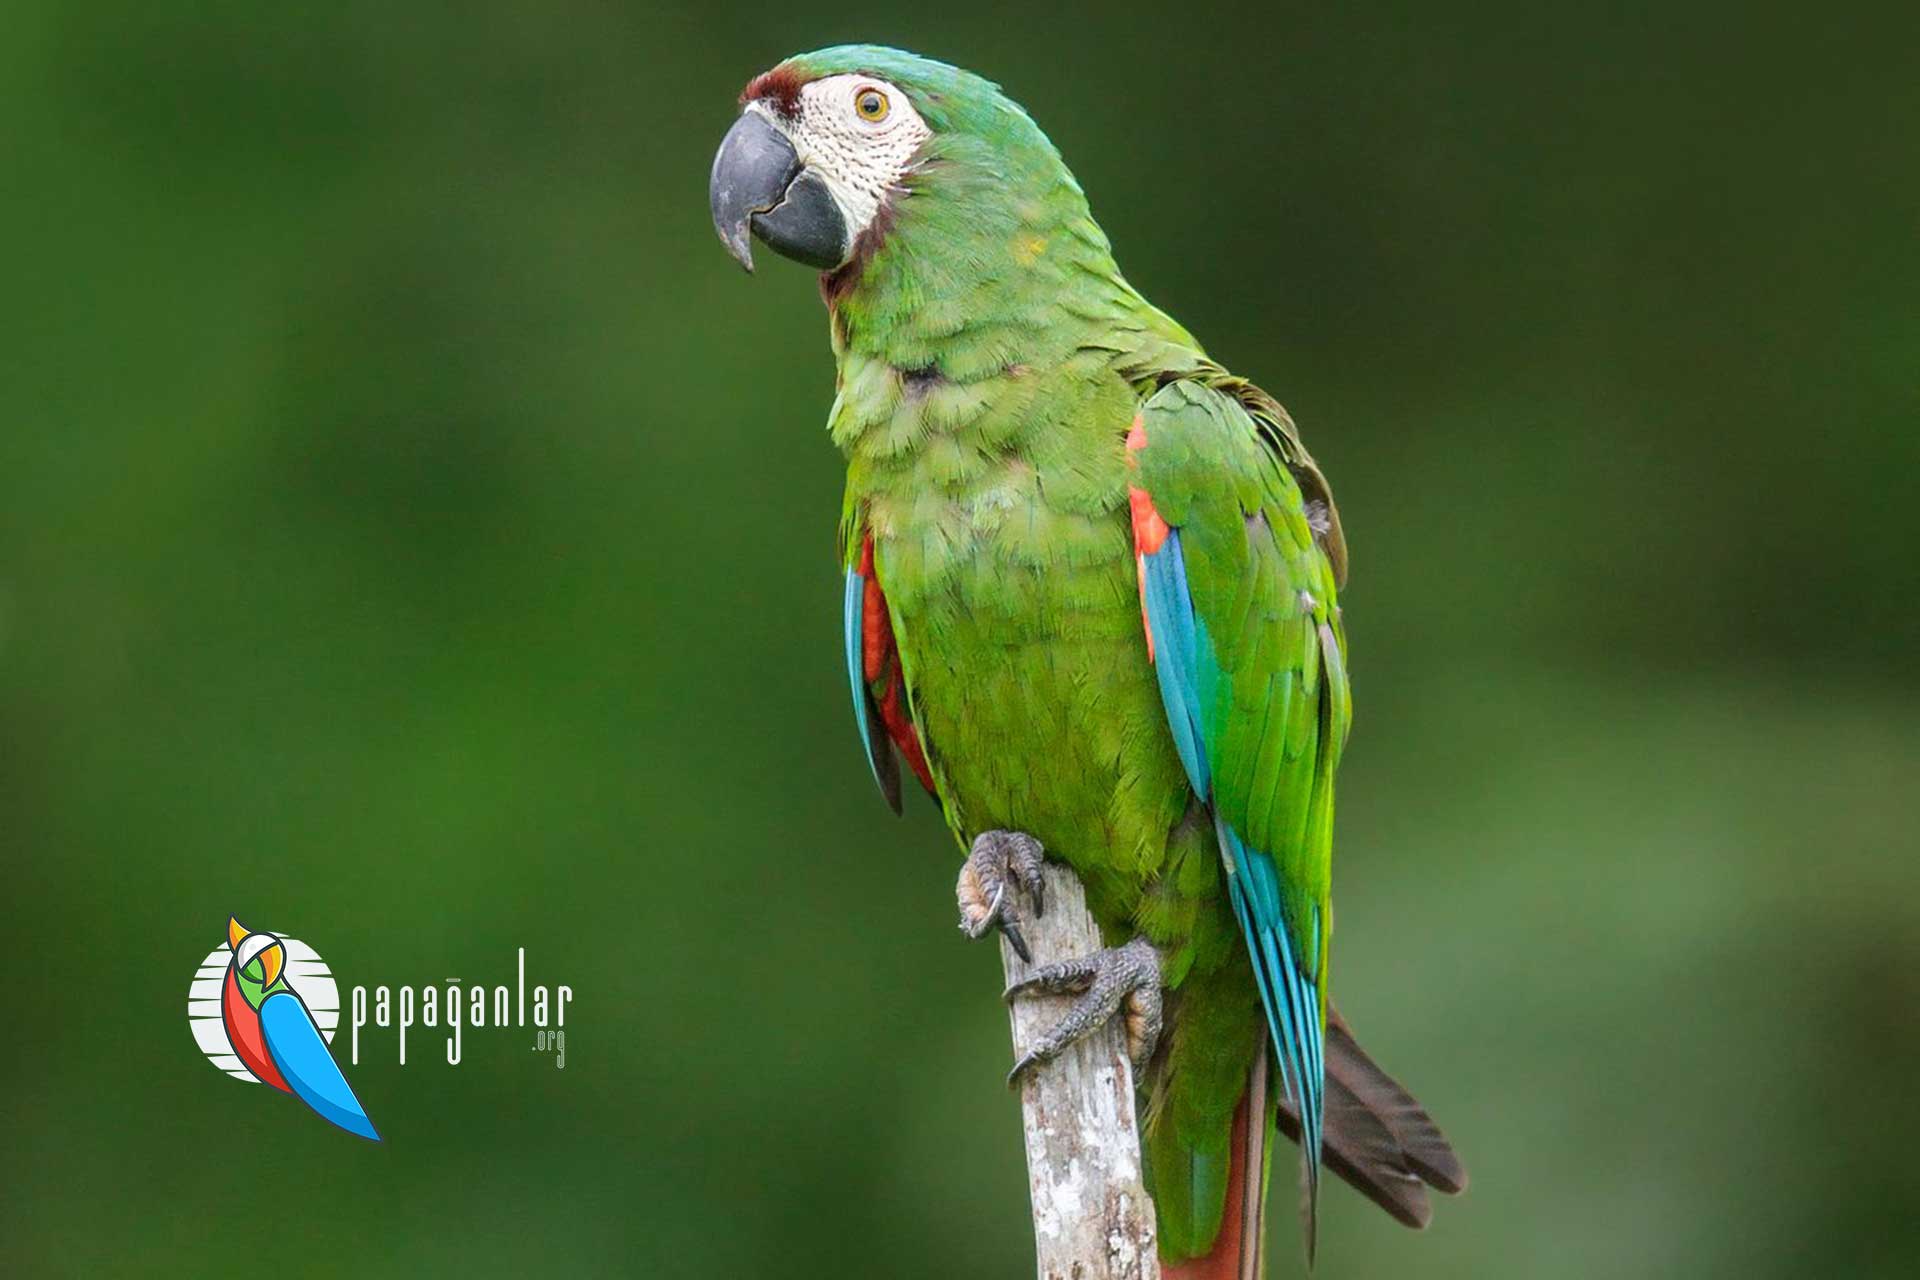 places selling macaw parrots